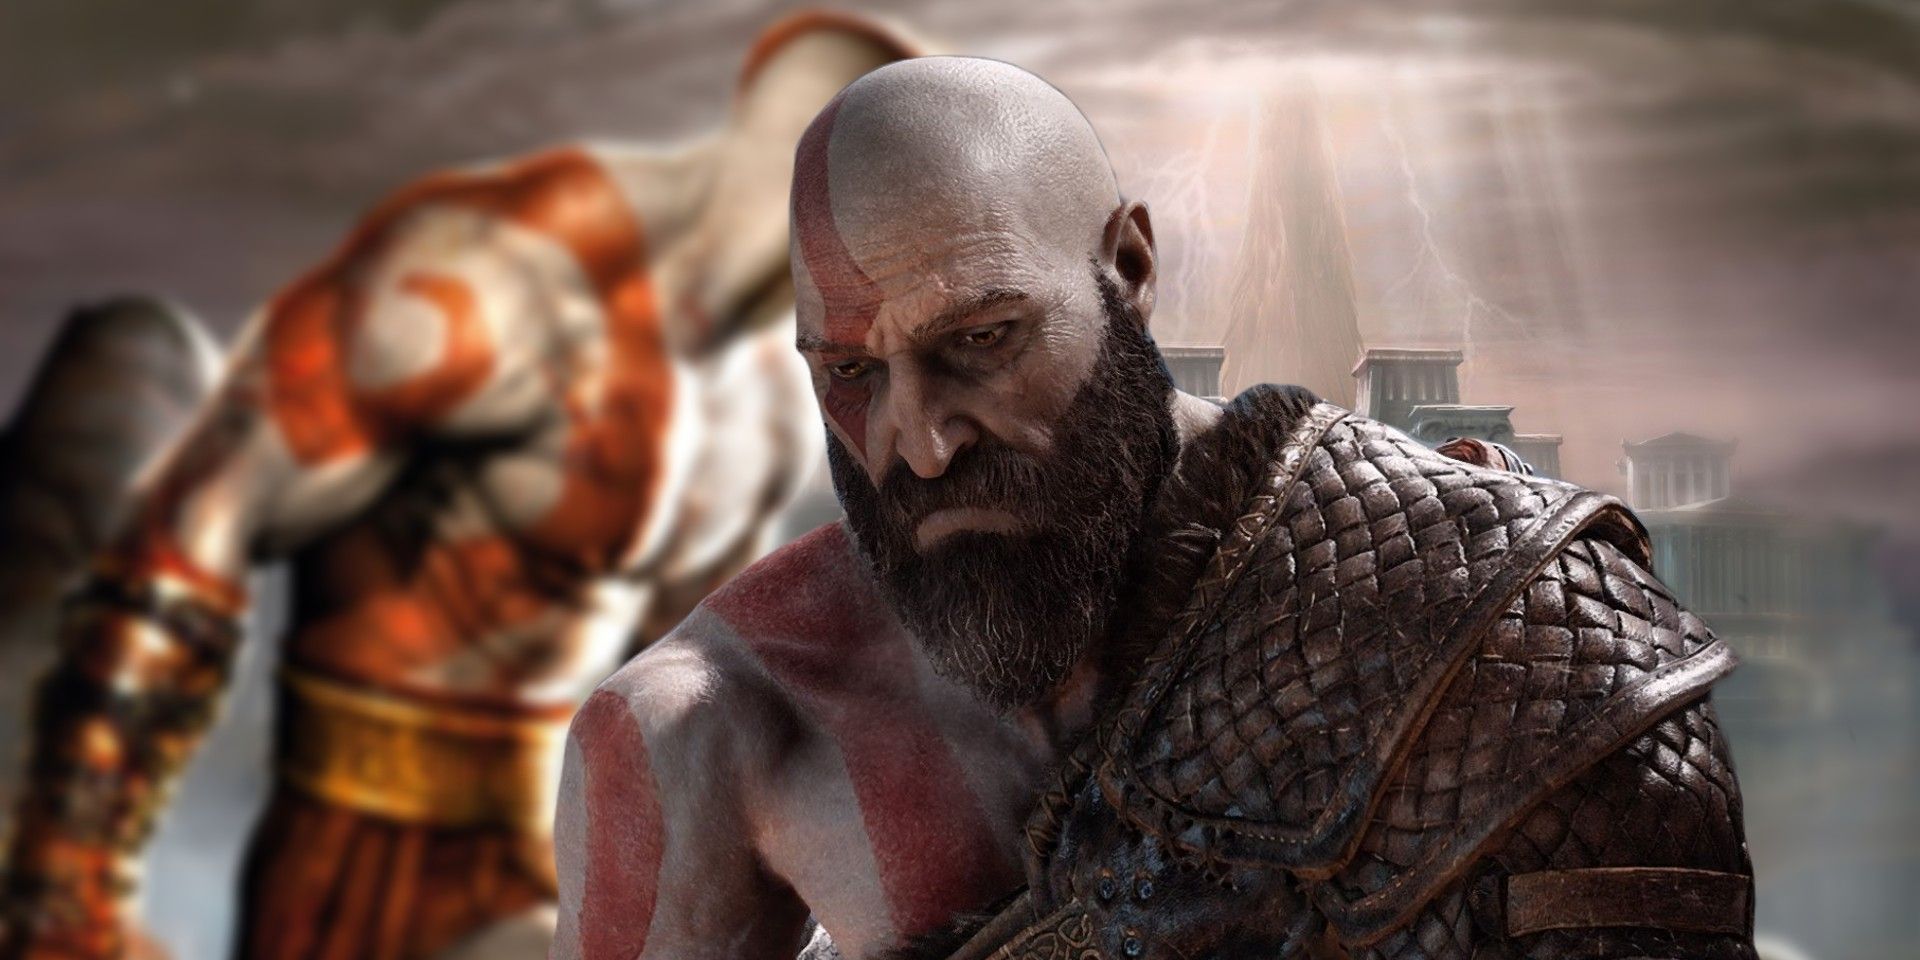 With Kratos' history of brutally killing the gods due to his rage